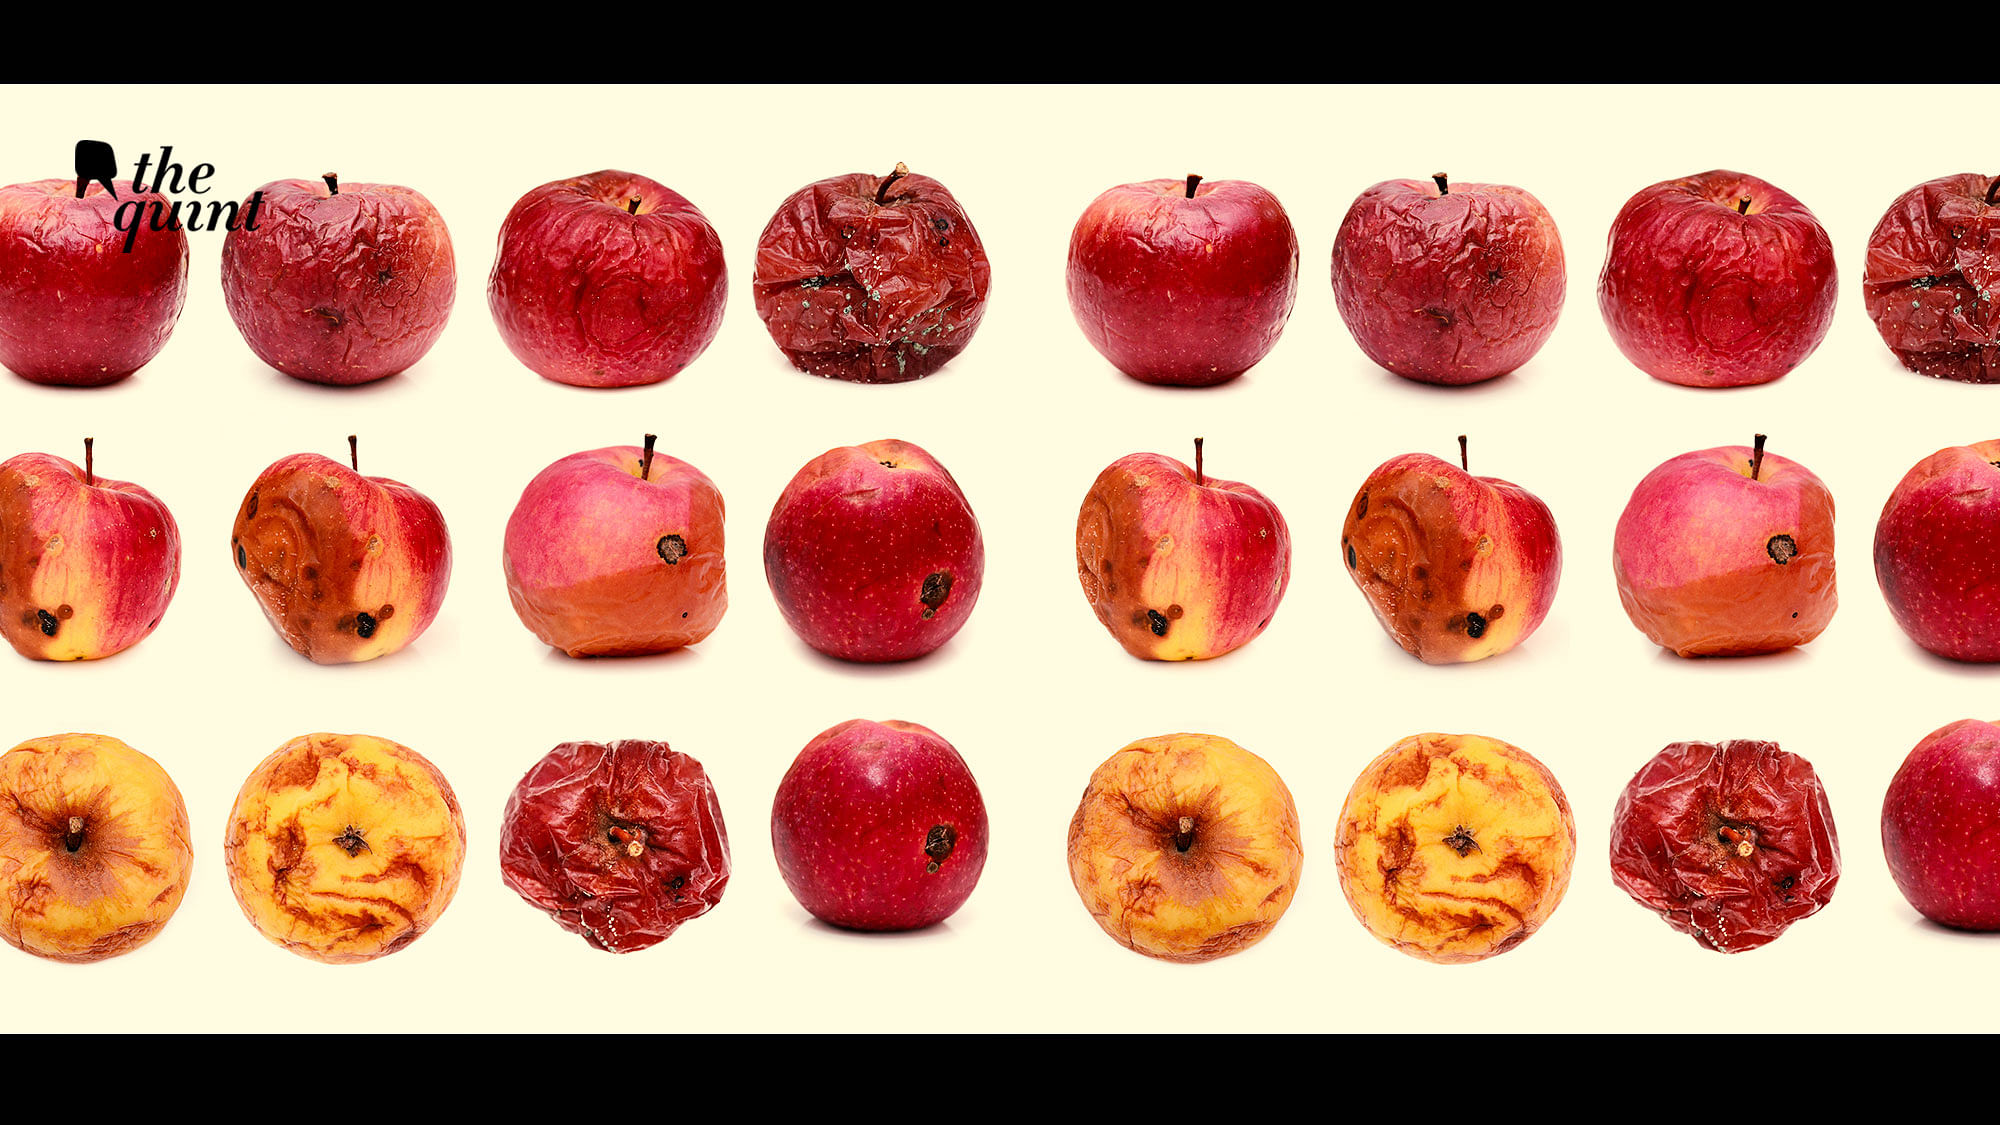 Image of rotting apples used for representational purposes.